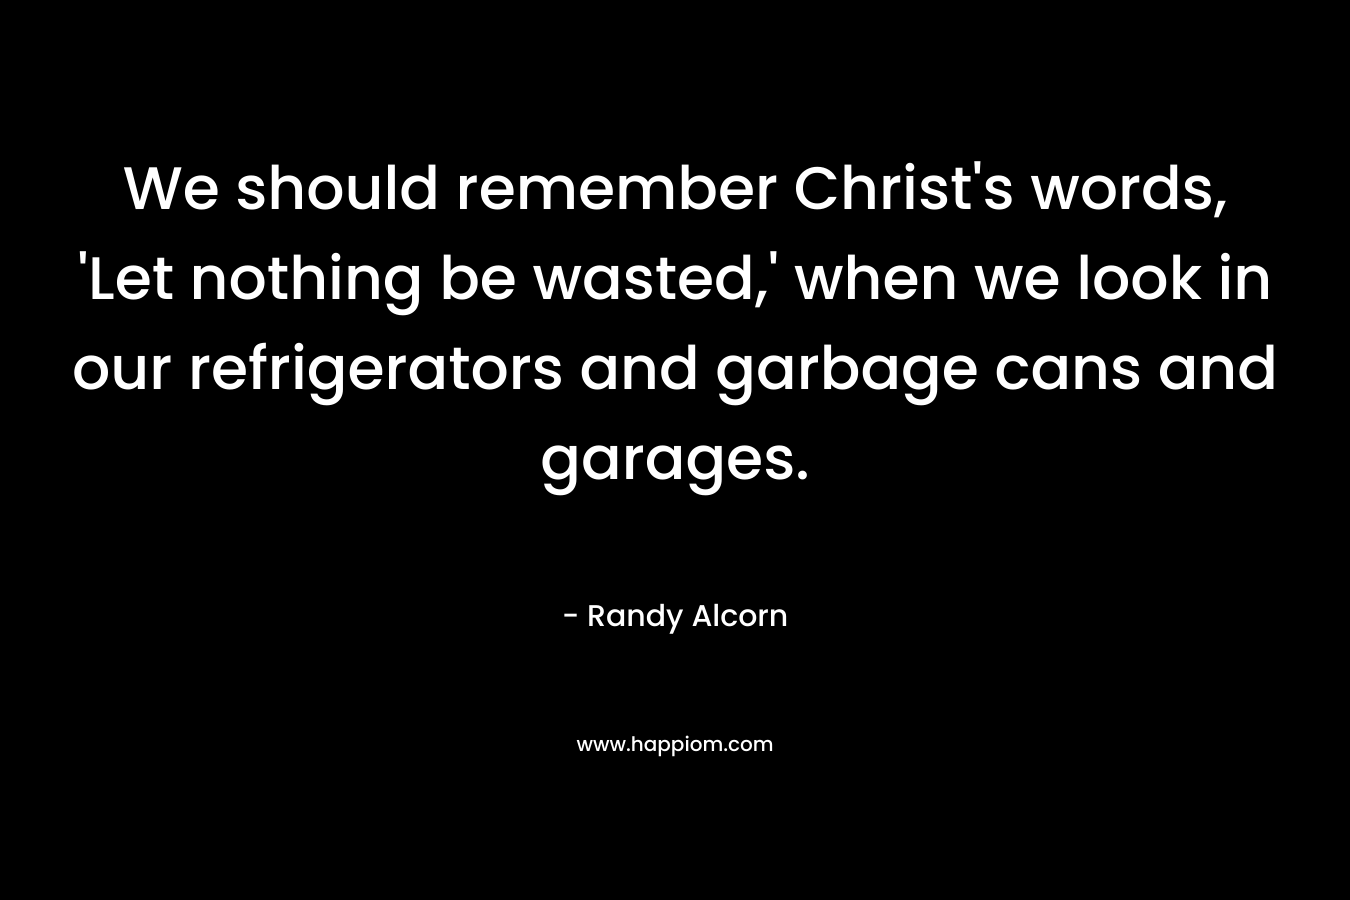 We should remember Christ’s words, ‘Let nothing be wasted,’ when we look in our refrigerators and garbage cans and garages. – Randy Alcorn